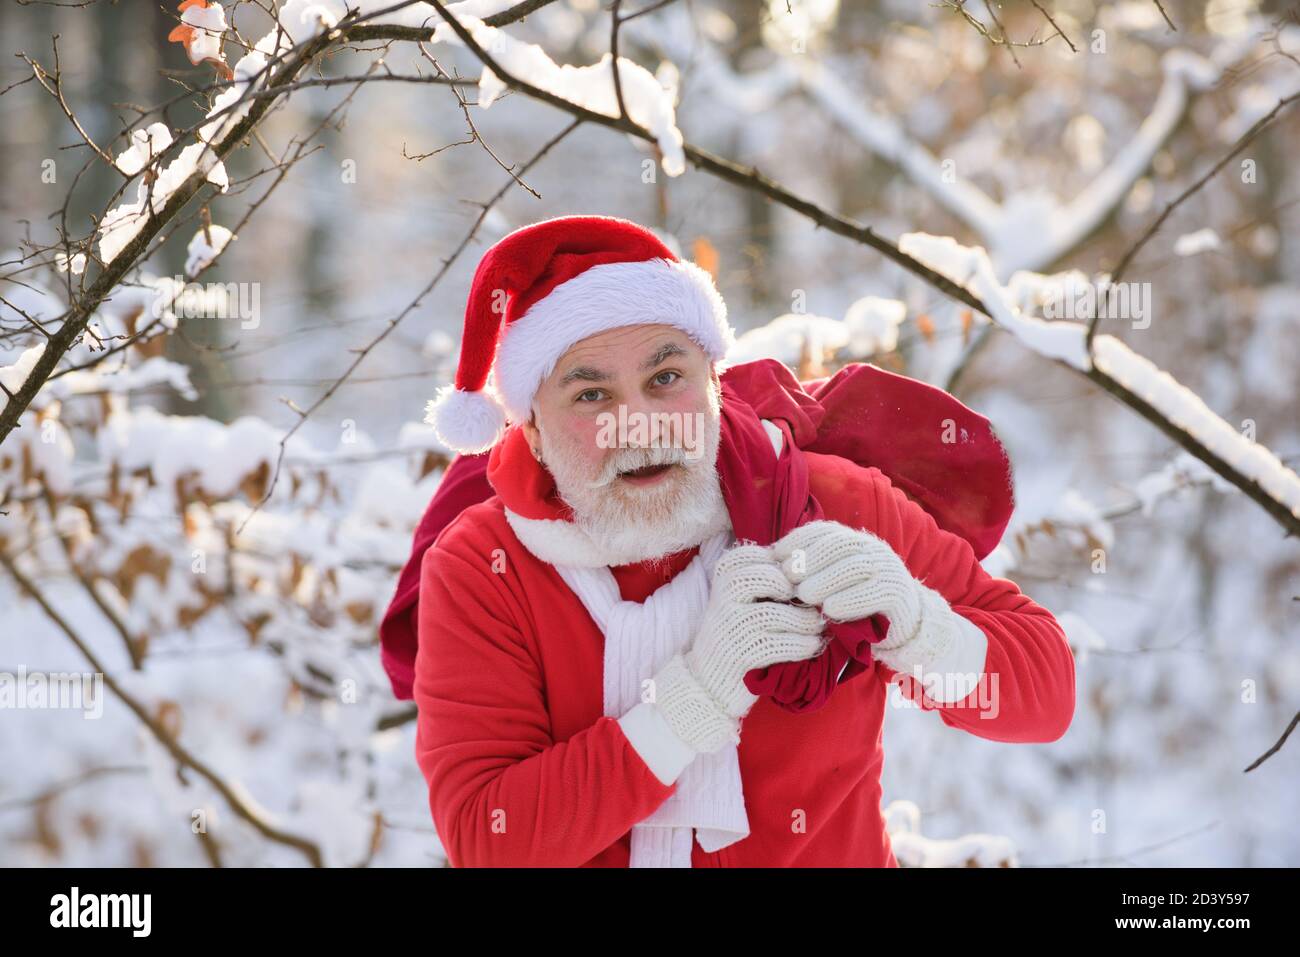 Santa claus greets in the snowy forest in December. Elderly gray-haired man in a Santa Claus costume and Christmas gift outdoors. Stock Photo